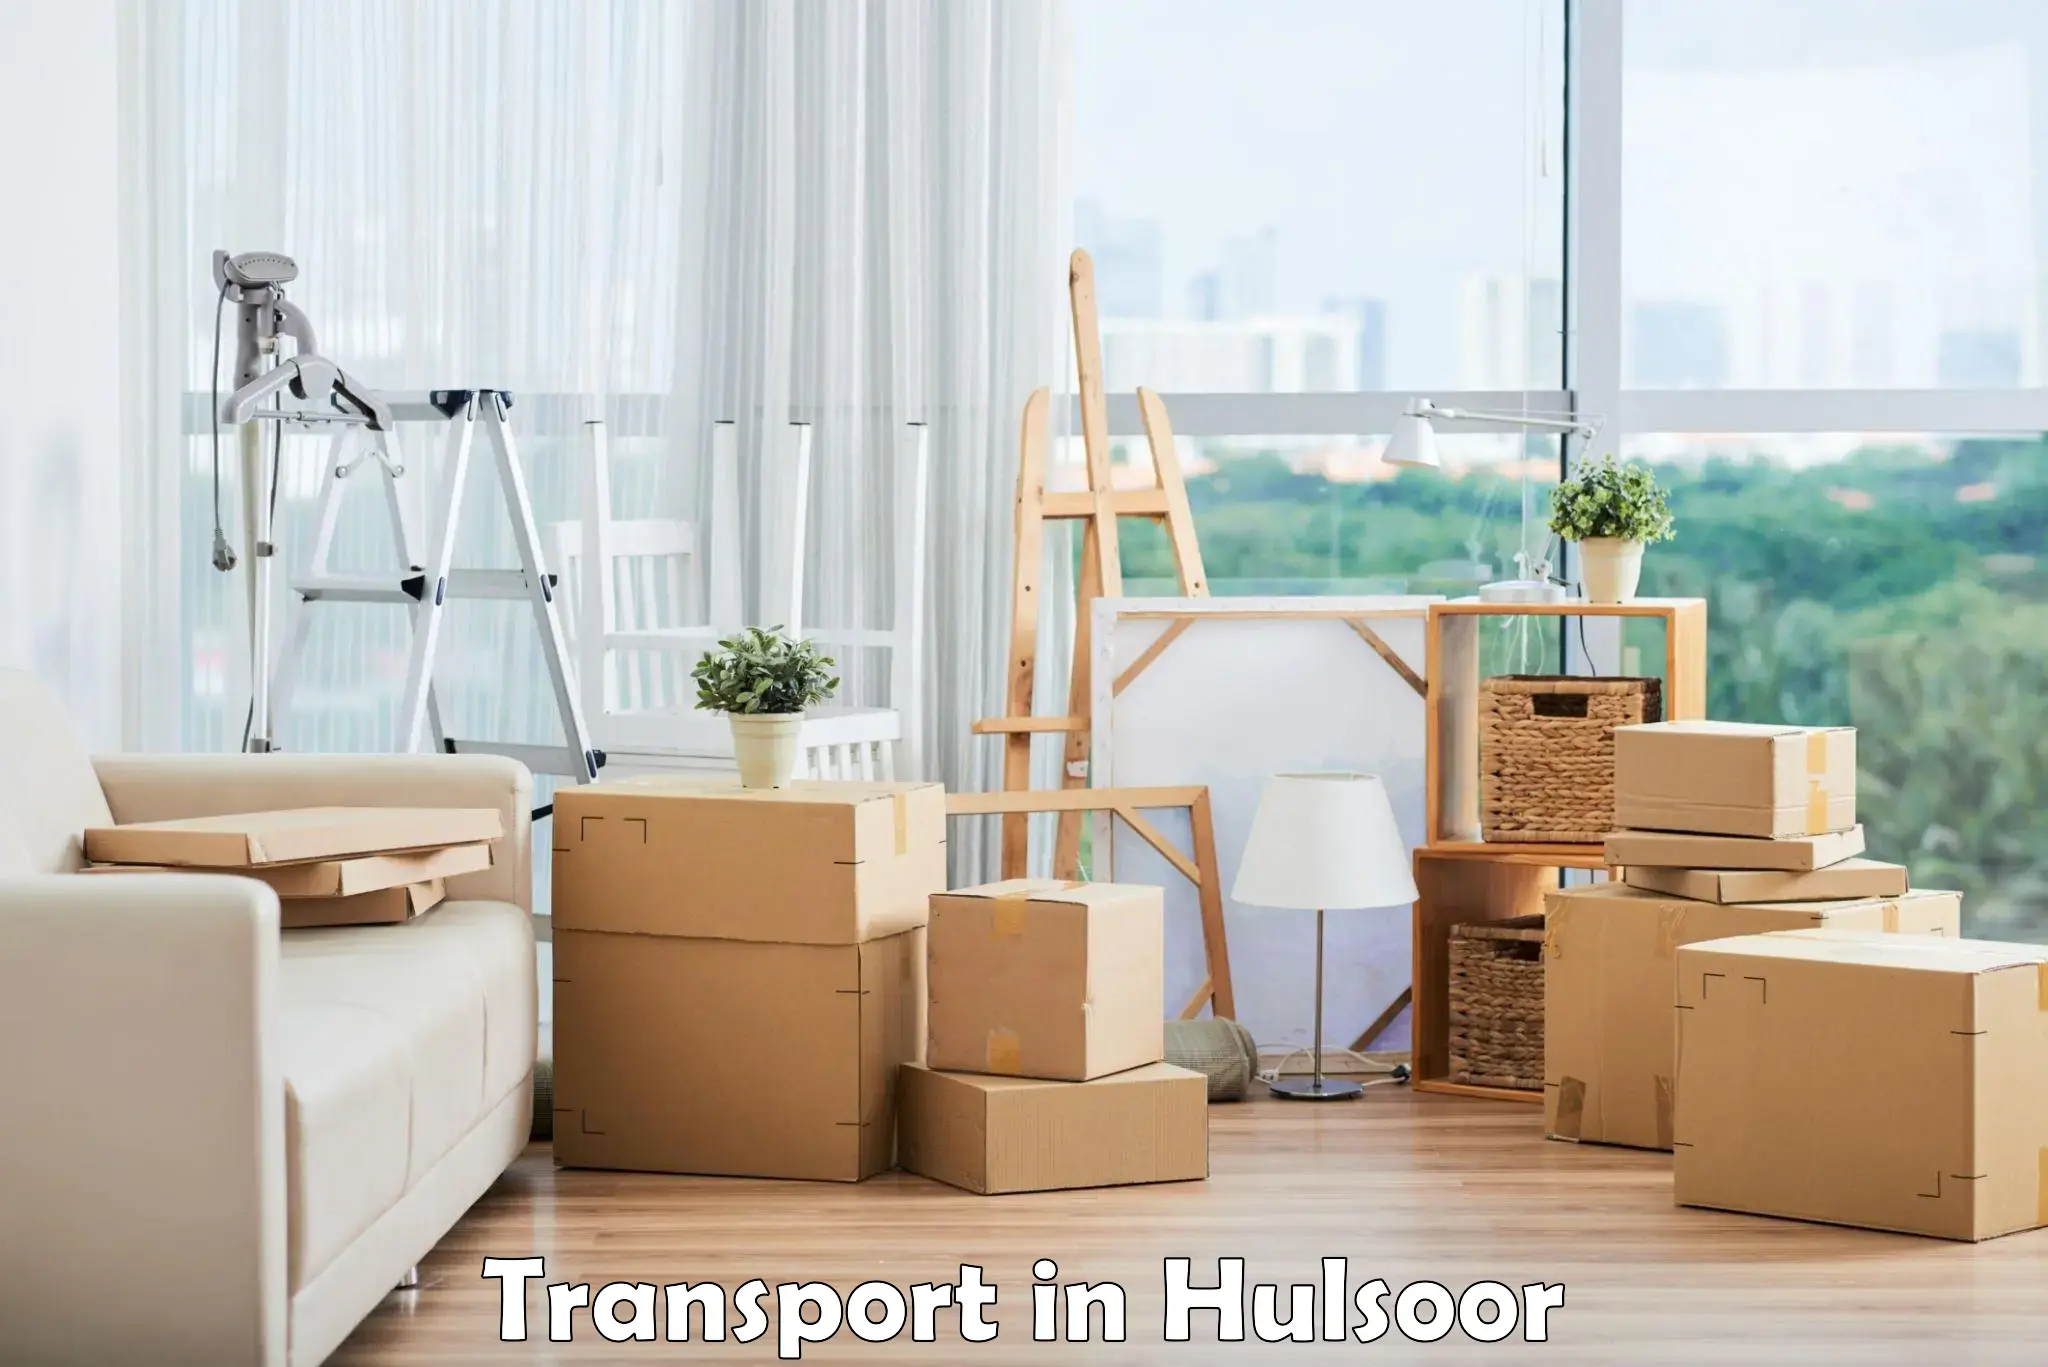 Transport shared services in Hulsoor